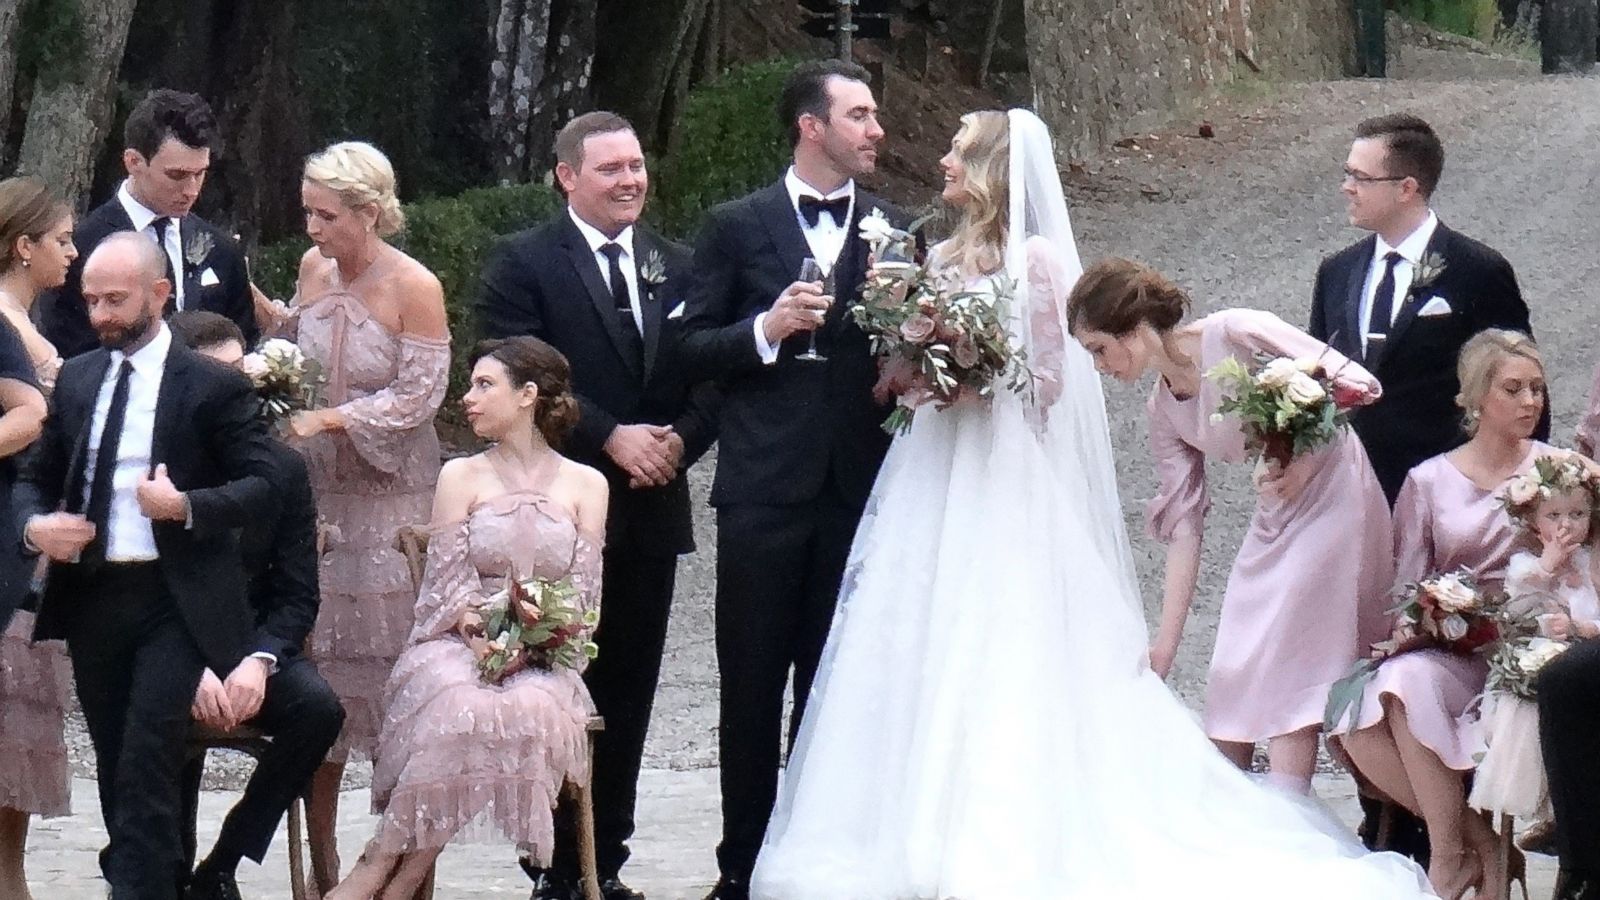 Kate Upton shares wedding photos after marrying Houston Astros